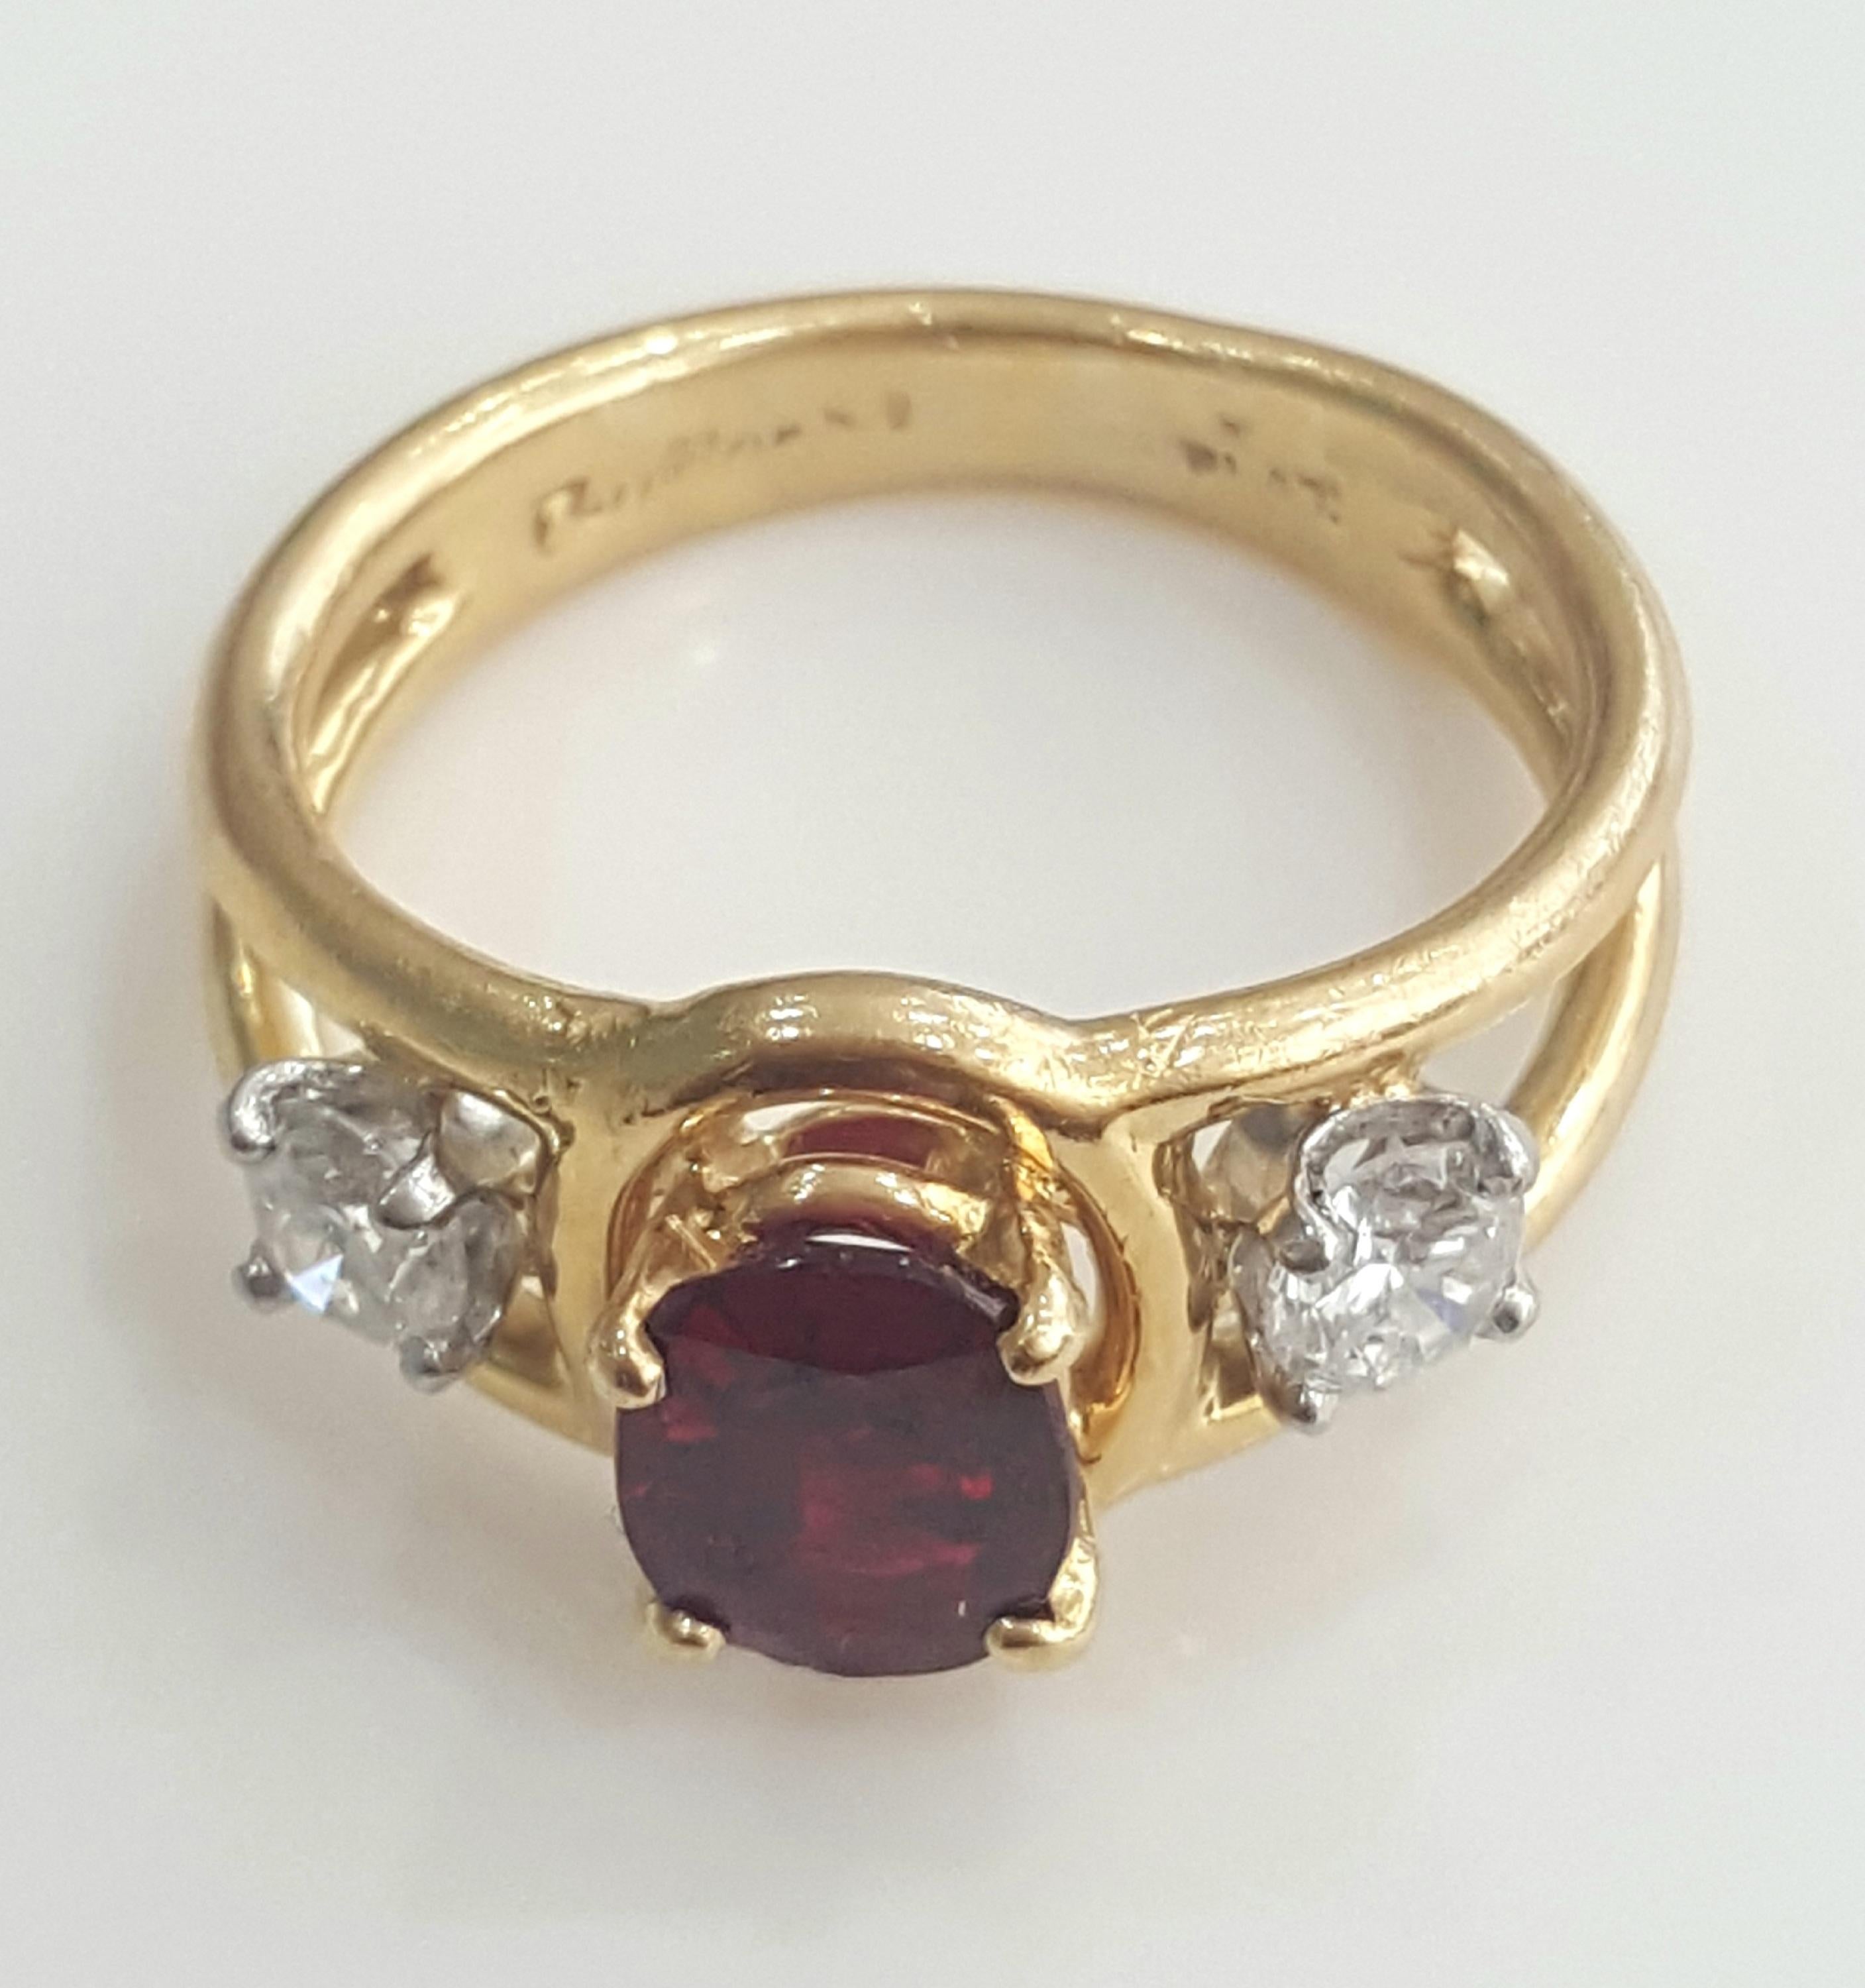  Cartier 1.70 Carat Natural Oval Ruby Heat and White Diamond Ring in 18 Karat. 2